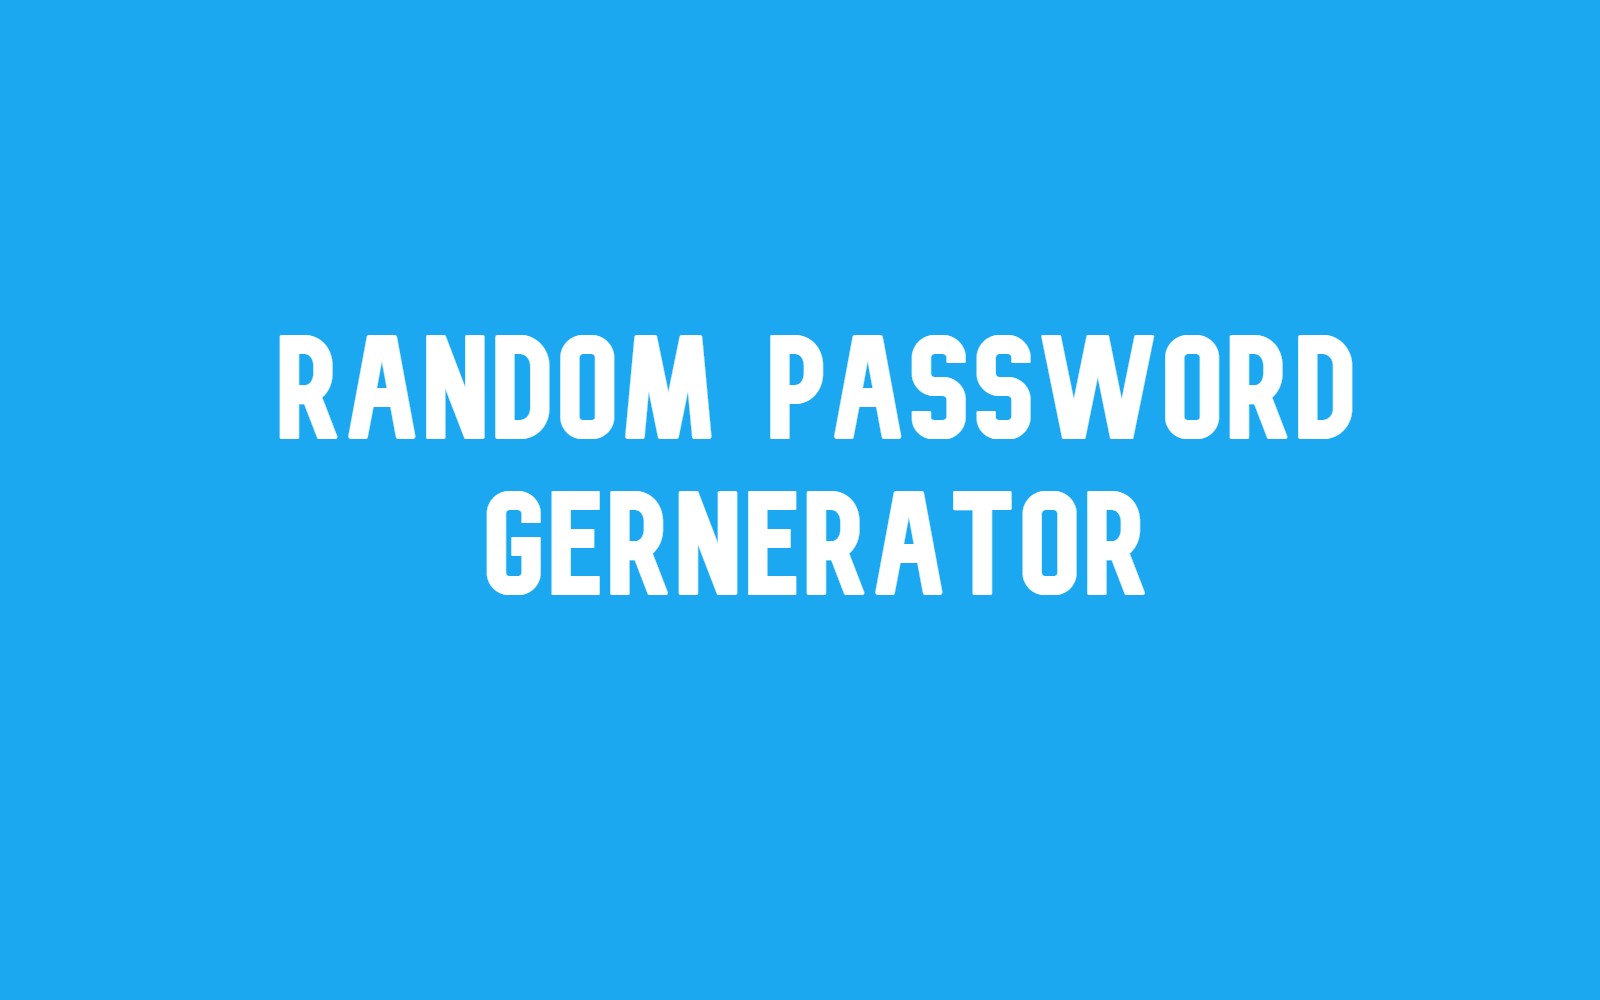 Best random strong password generator free ar3 school tool for blogger 2022.  Create a new online free random password generating freely by clicking on the button below to get a strong password.  Best random strong password generator free ar3 school tool for blogger 2022.        AE3school Password generator features: Free tool. No limited generating to get PW. Password Length: 15 Include Symbols:( e.g. @#$% ) Include Numbers:( e.g. 123456 ) Include Lowercase Characters:( e.g. abcdefgh ) Include Uppercase Characters:( e.g. ABCDEFGH ) Enclude Similar Characters:( e.g. i, l, 1, L, o, 0, O ).  Warch more best AR3school tools  Click on the button to generate a password  Generate Password